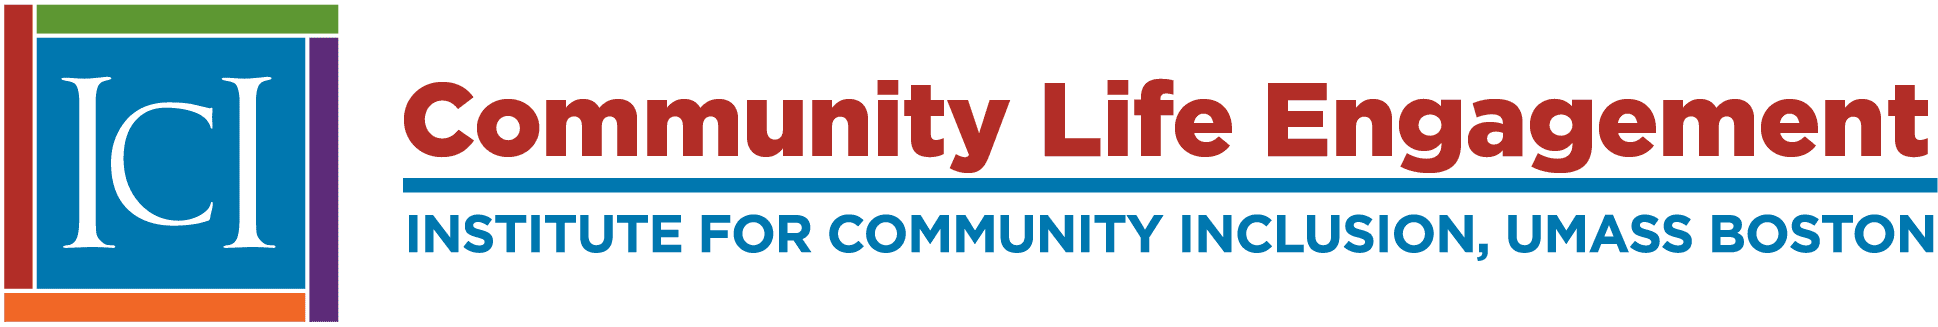 Community Life Engagement | Institute for Community Inclusion